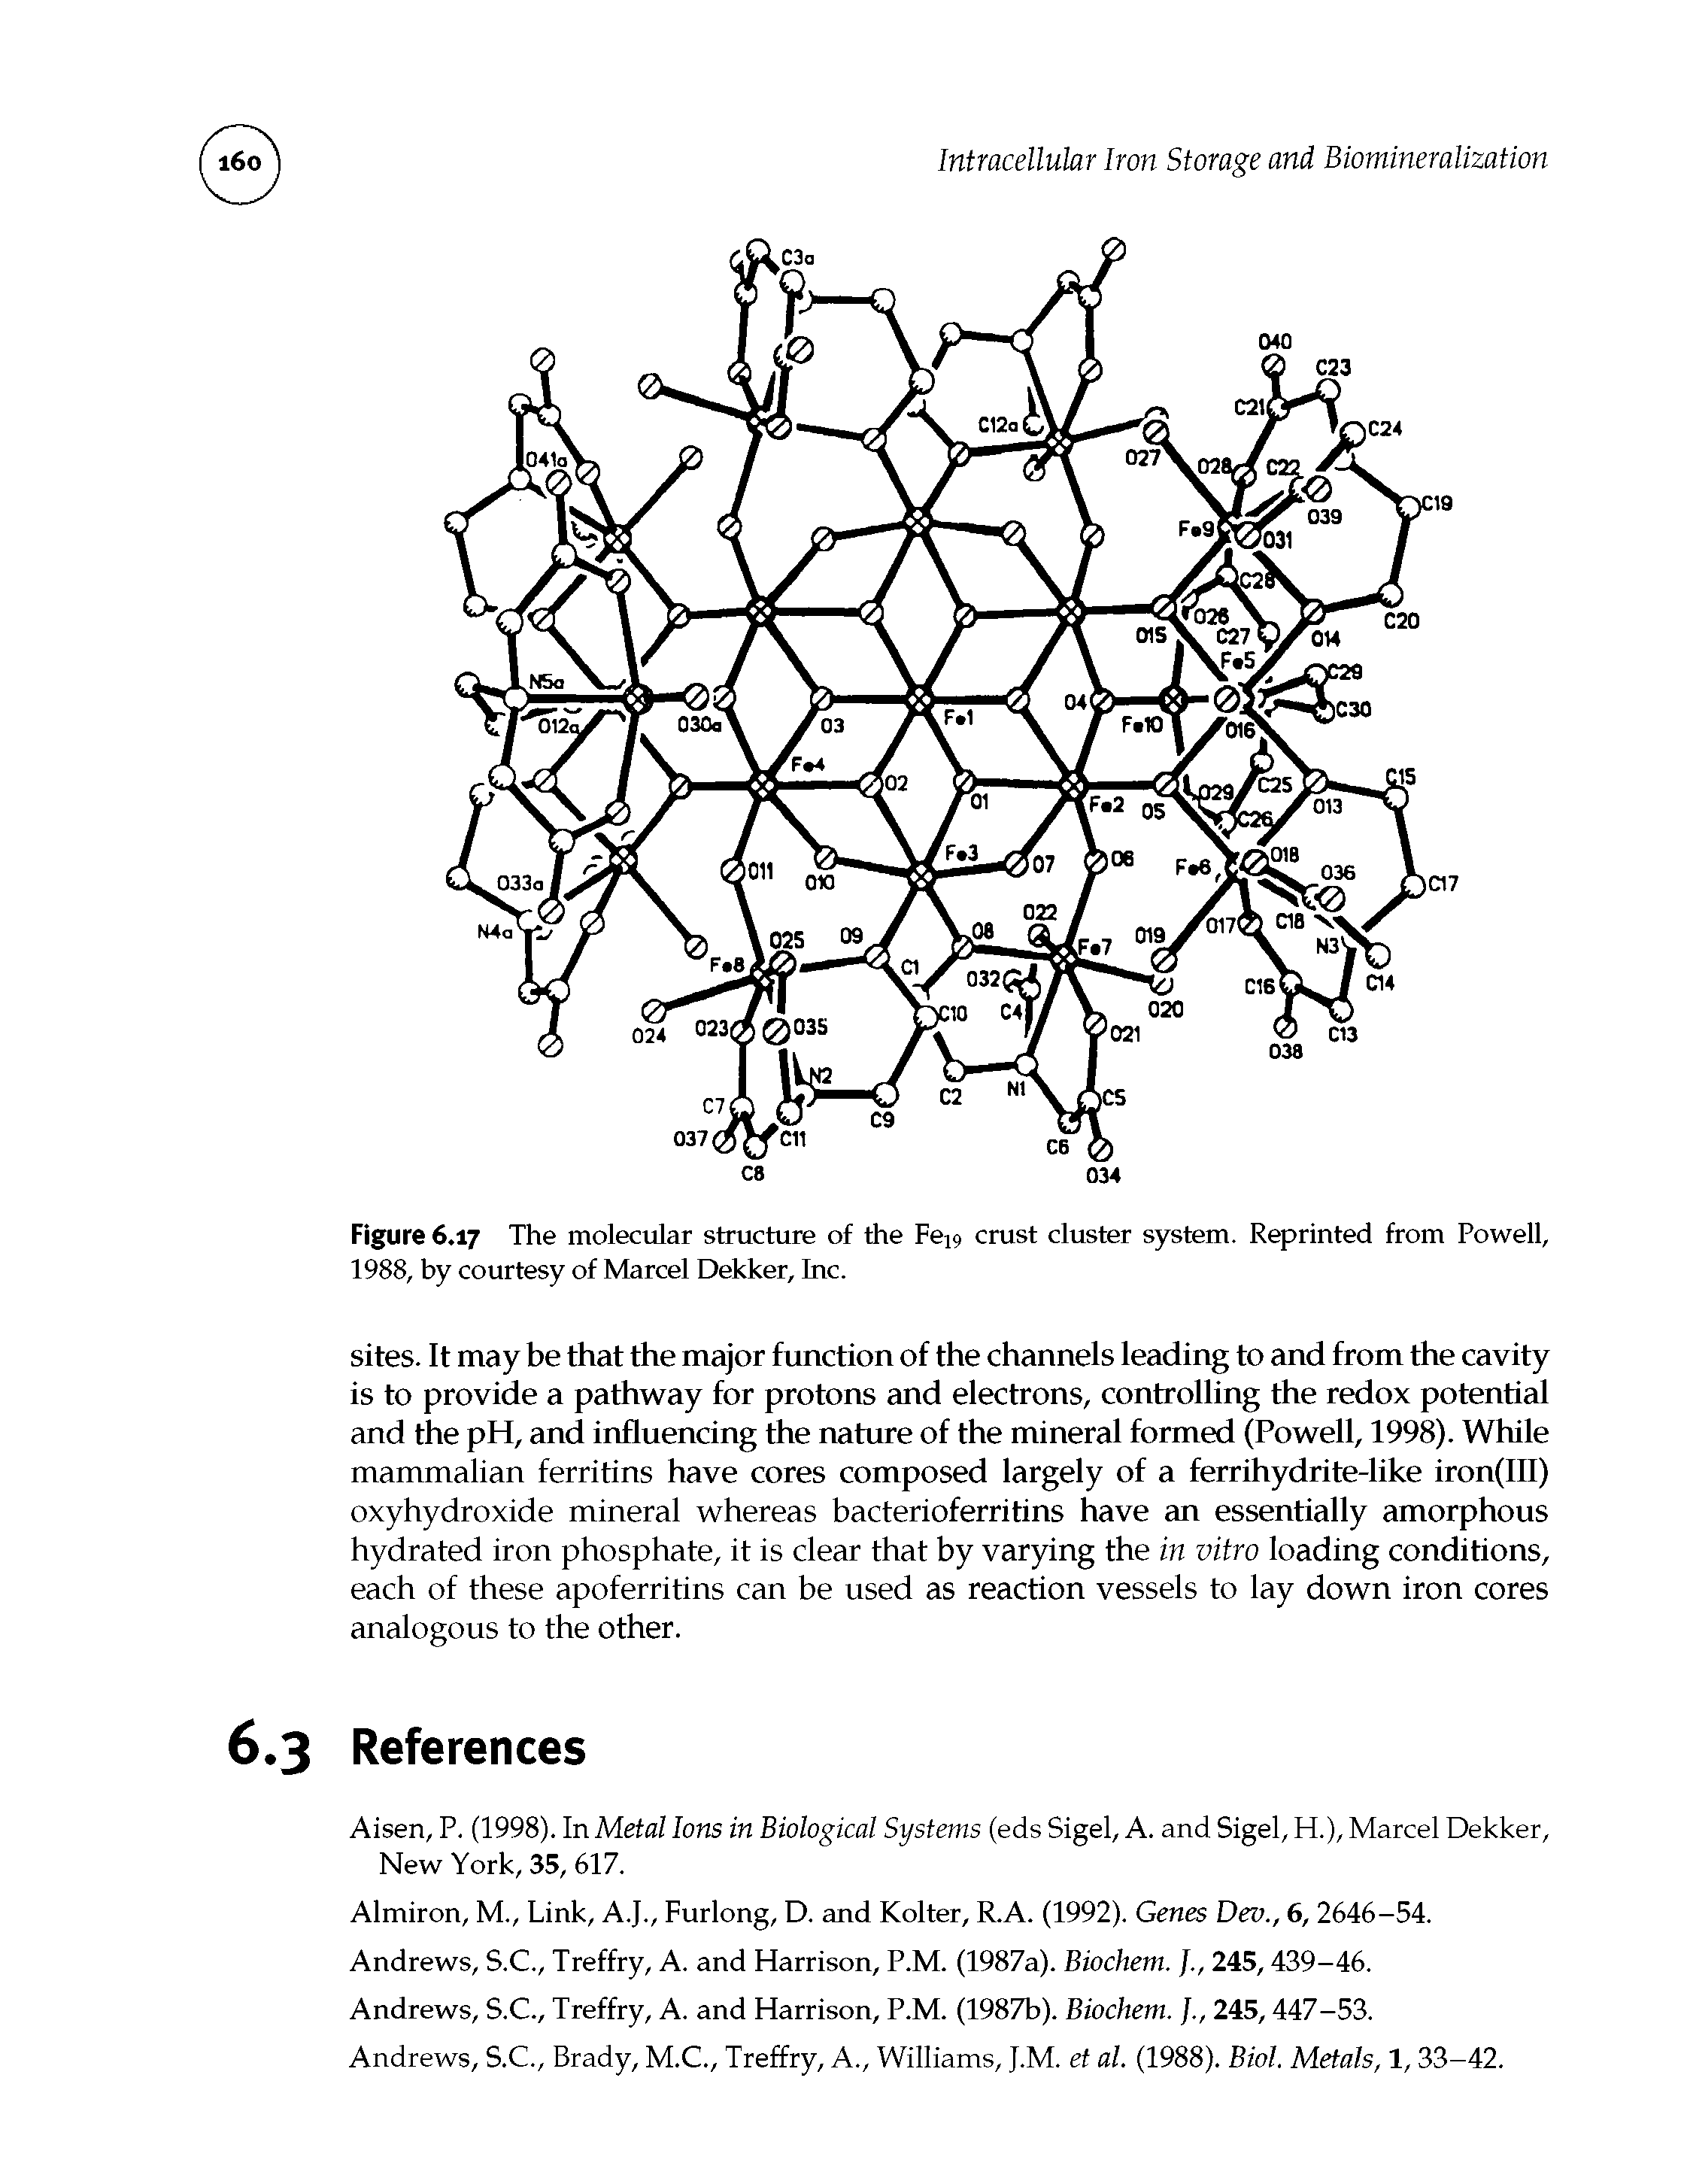 Figure 6.17 The molecular structure of the Fe19 crust cluster system. Reprinted from Powell, 1988, by courtesy of Marcel Dekker, Inc.